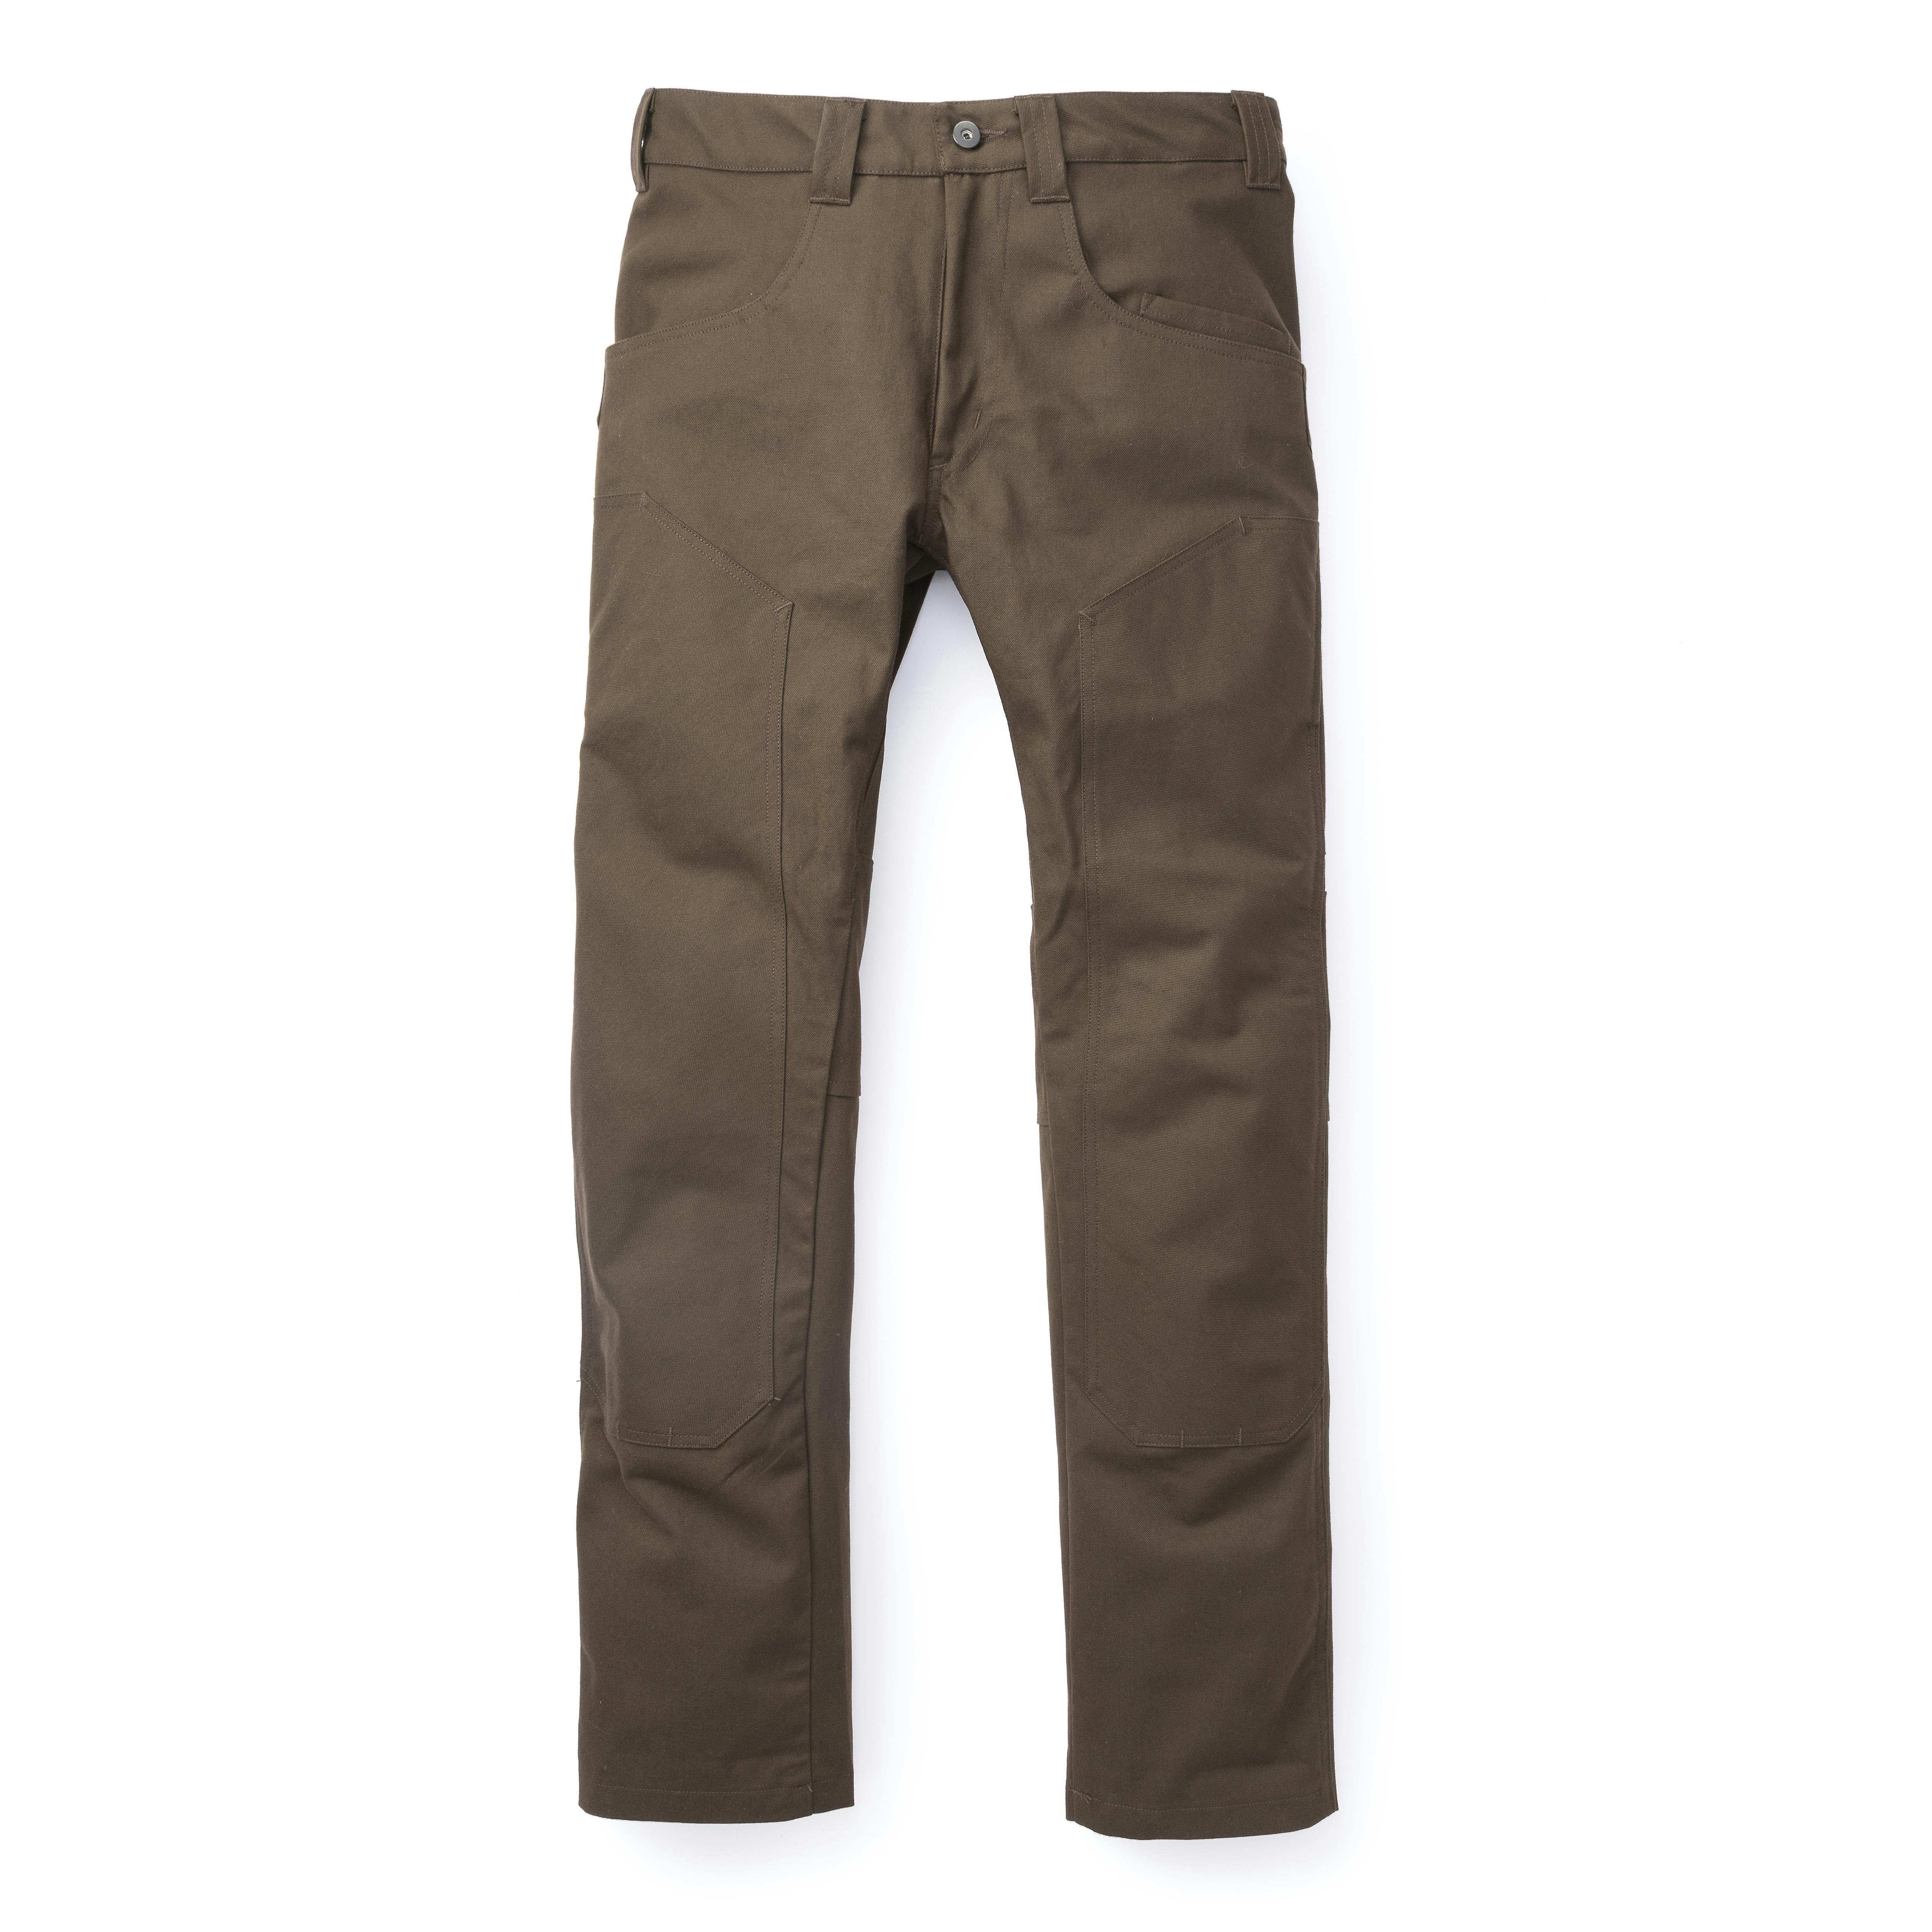 1620 Workwear Double Knee Utility Pant - Expedition Portal